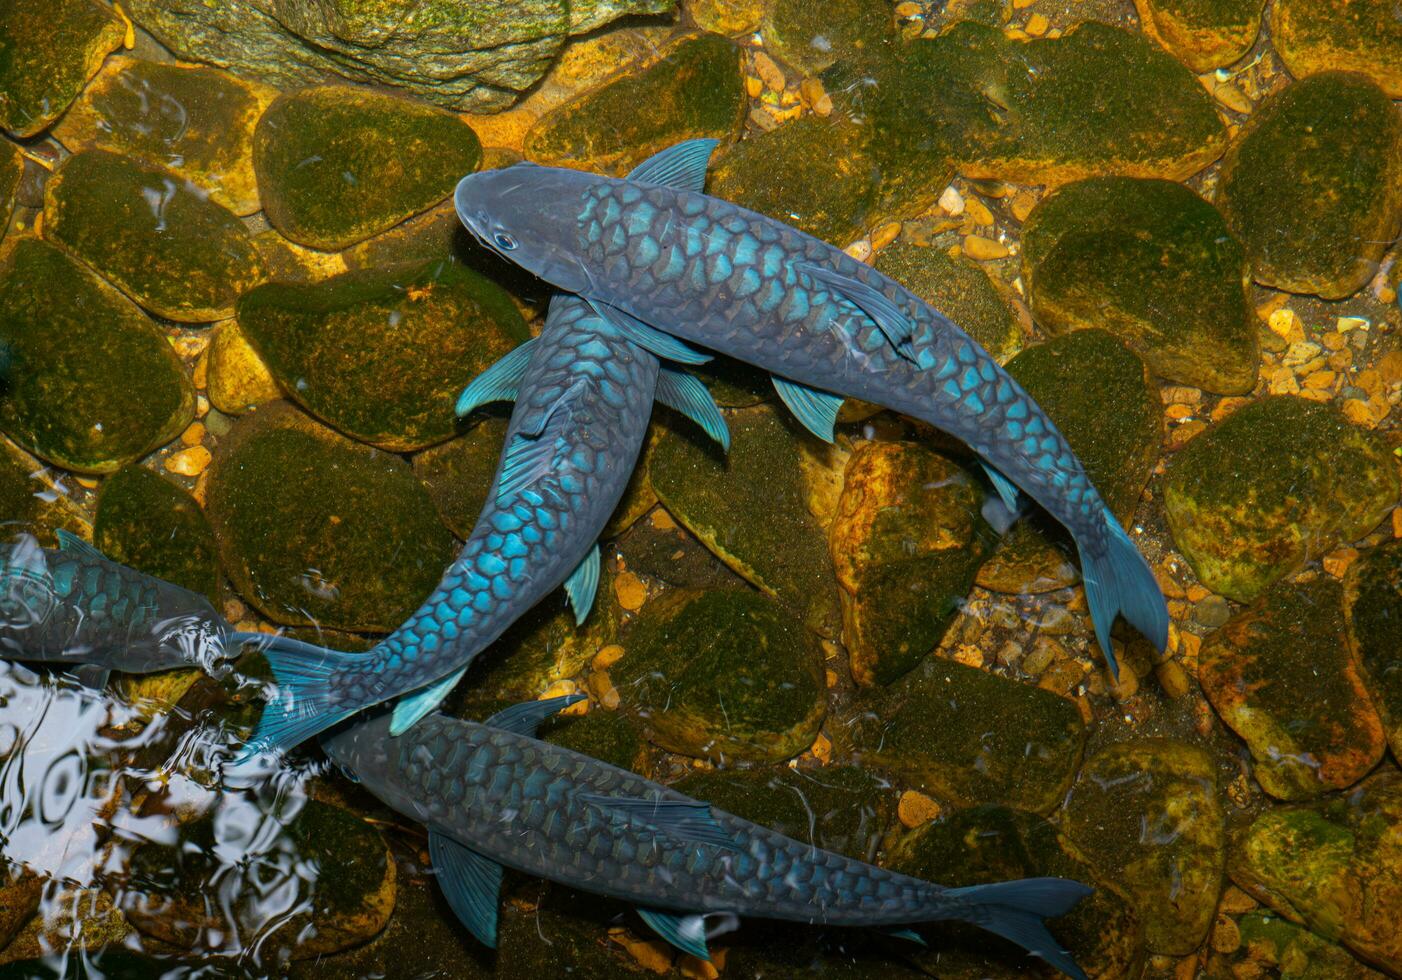 Schools of black fish have blue glassy scales. Swim in a pebble-bottomed pond with clear, clean water that is the nature of aquatic animals. photo